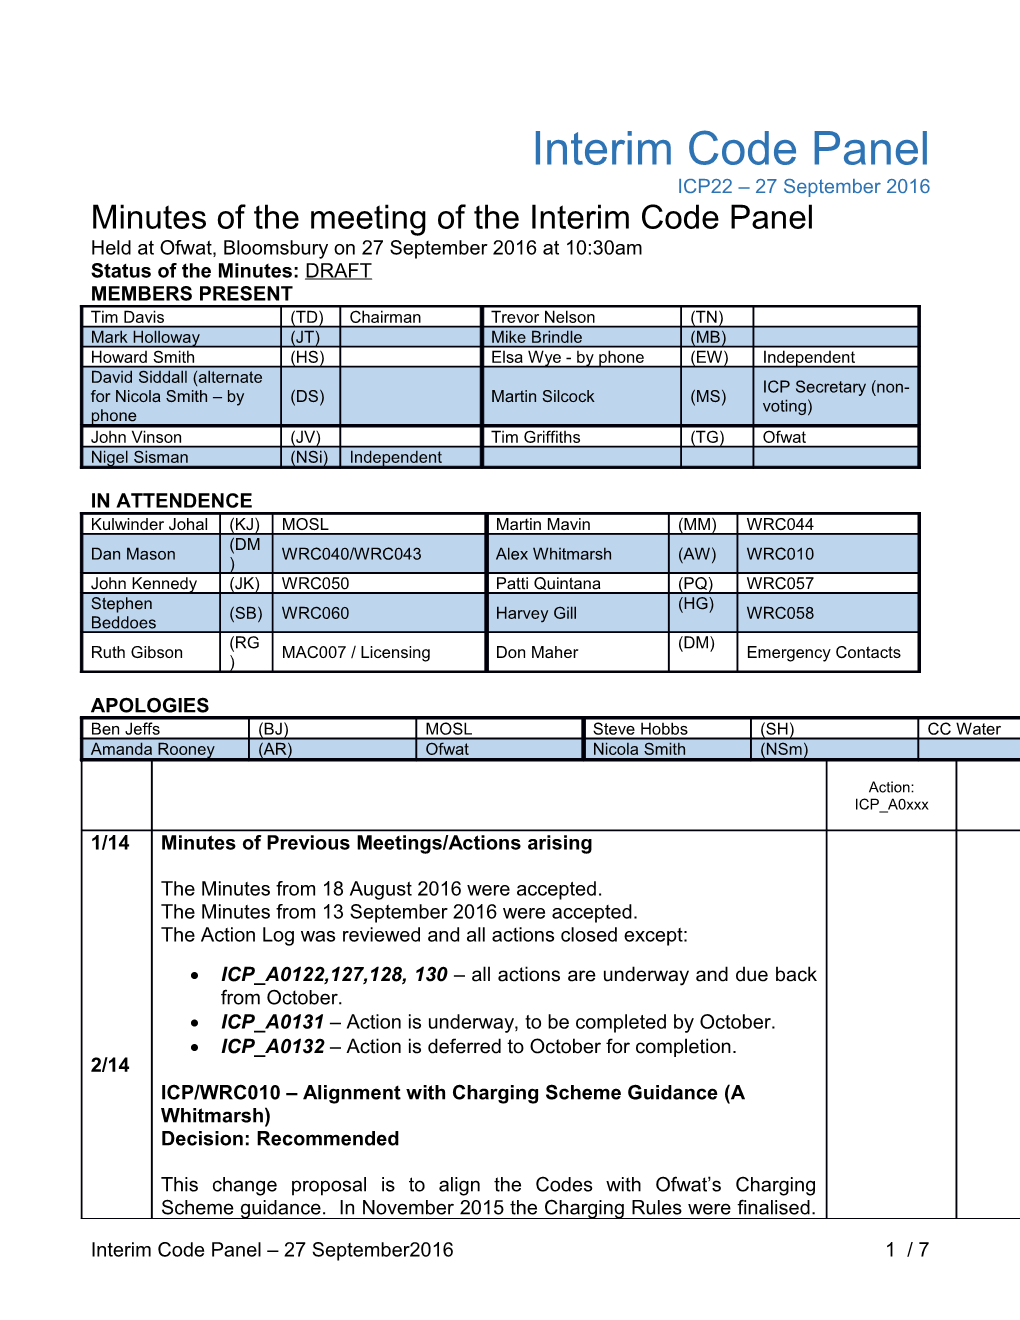 Minutes of the Meeting of the Interim Code Panel